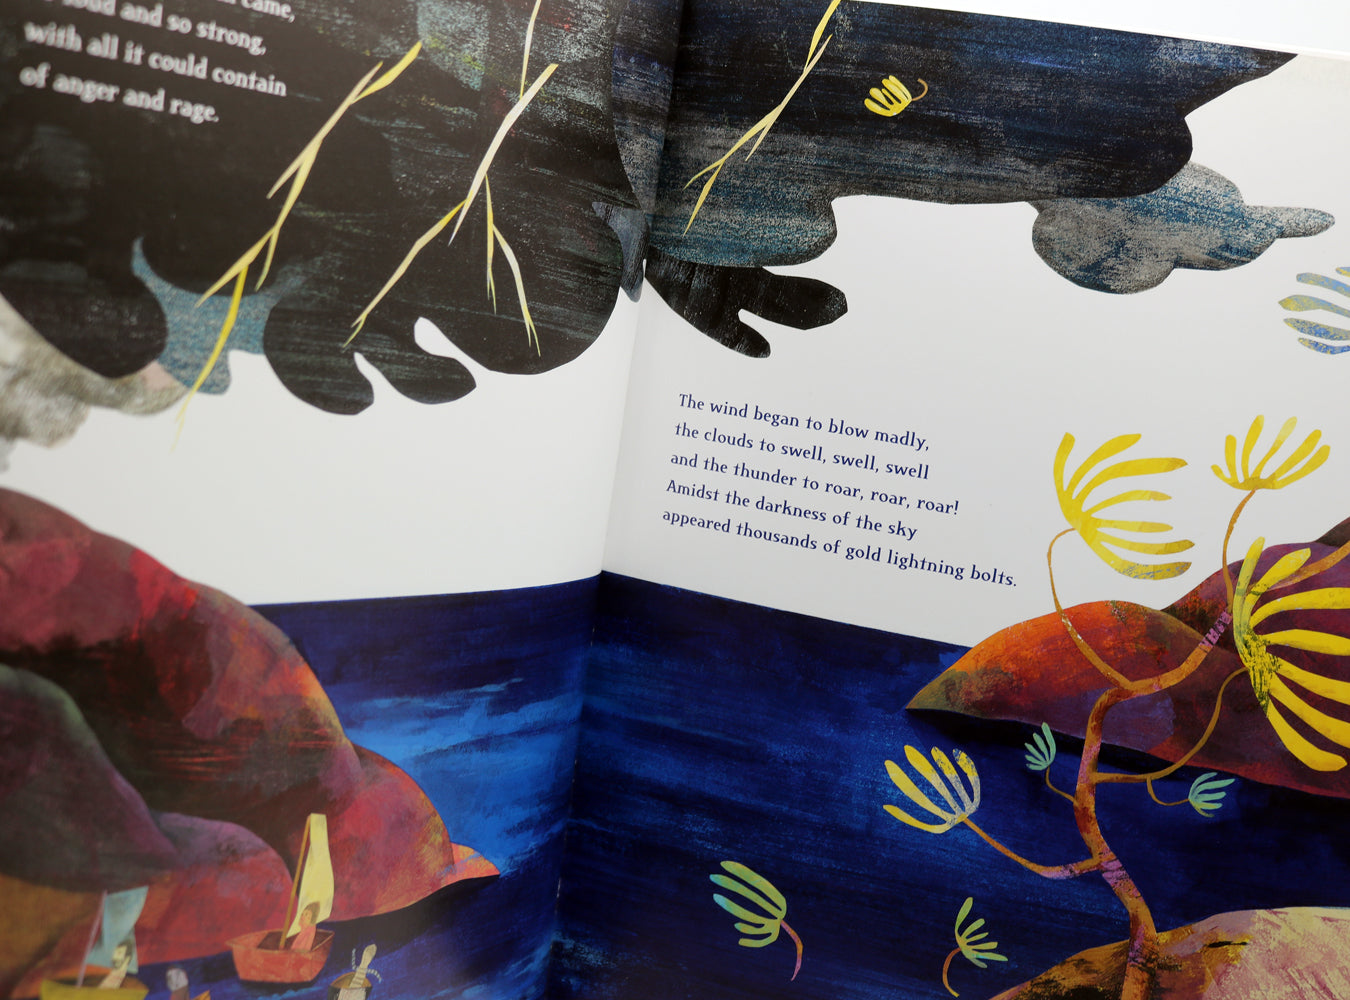 The Mermaid and the Parakeet: A Children's Book Inspired by Henri Matisse